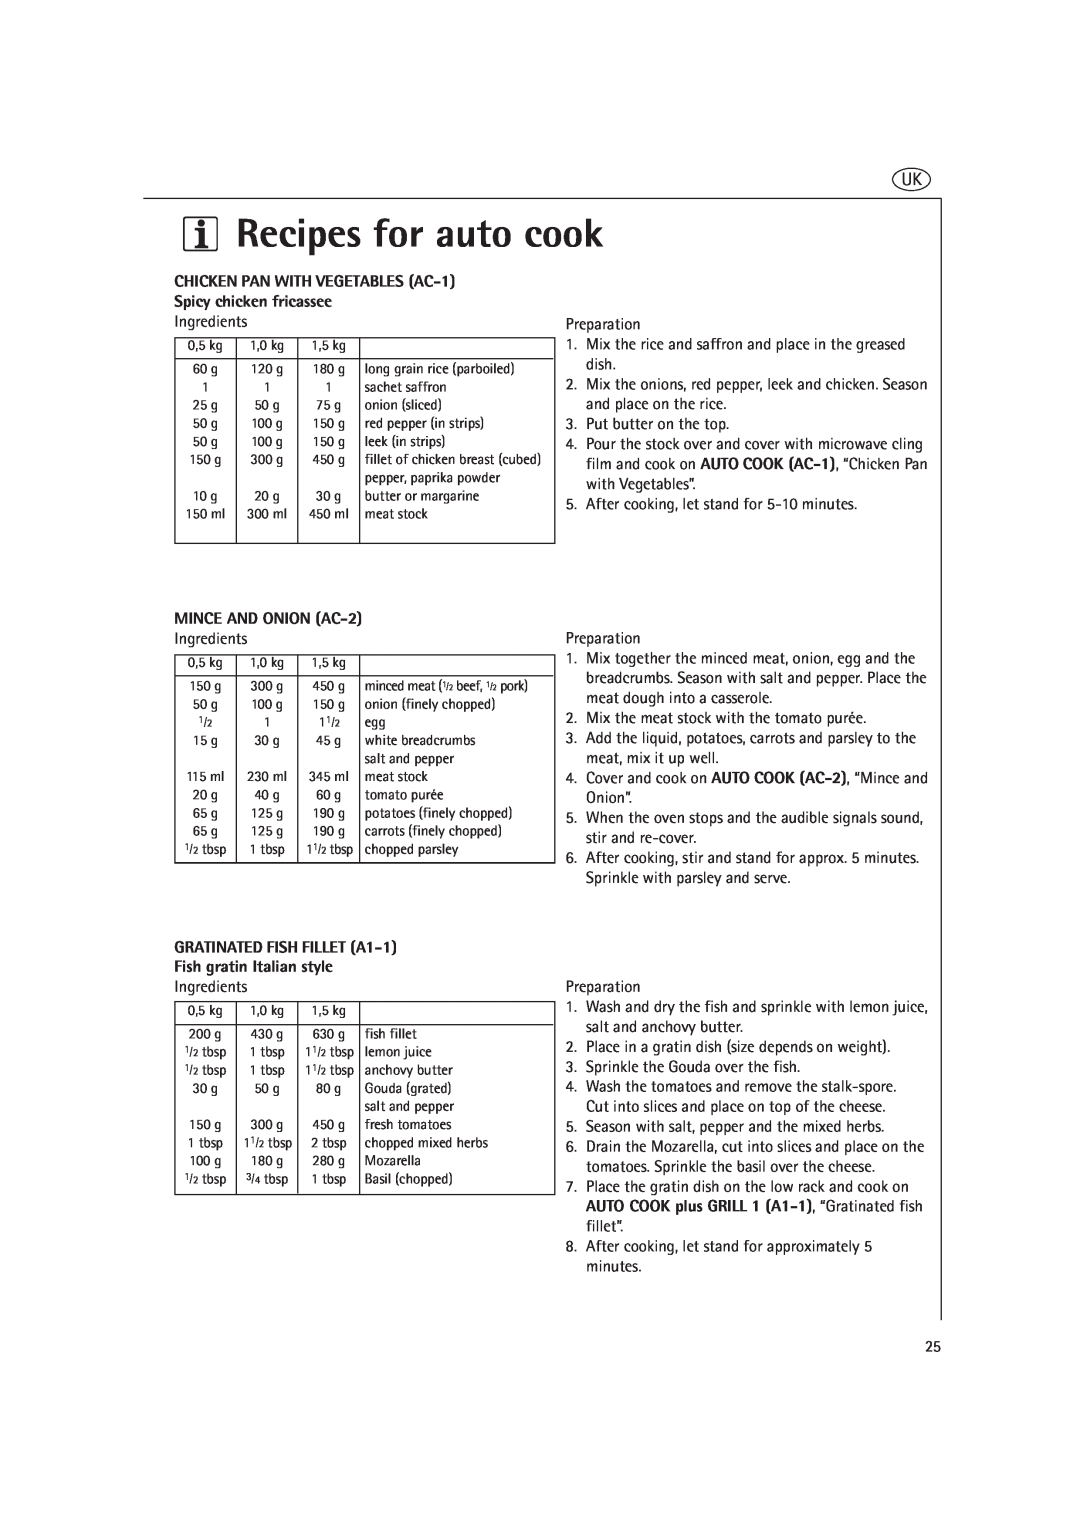 AEG MCD2660E Recipes for auto cook, CHICKEN PAN WITH VEGETABLES AC-1, Spicy chicken fricassee, MINCE AND ONION AC-2 